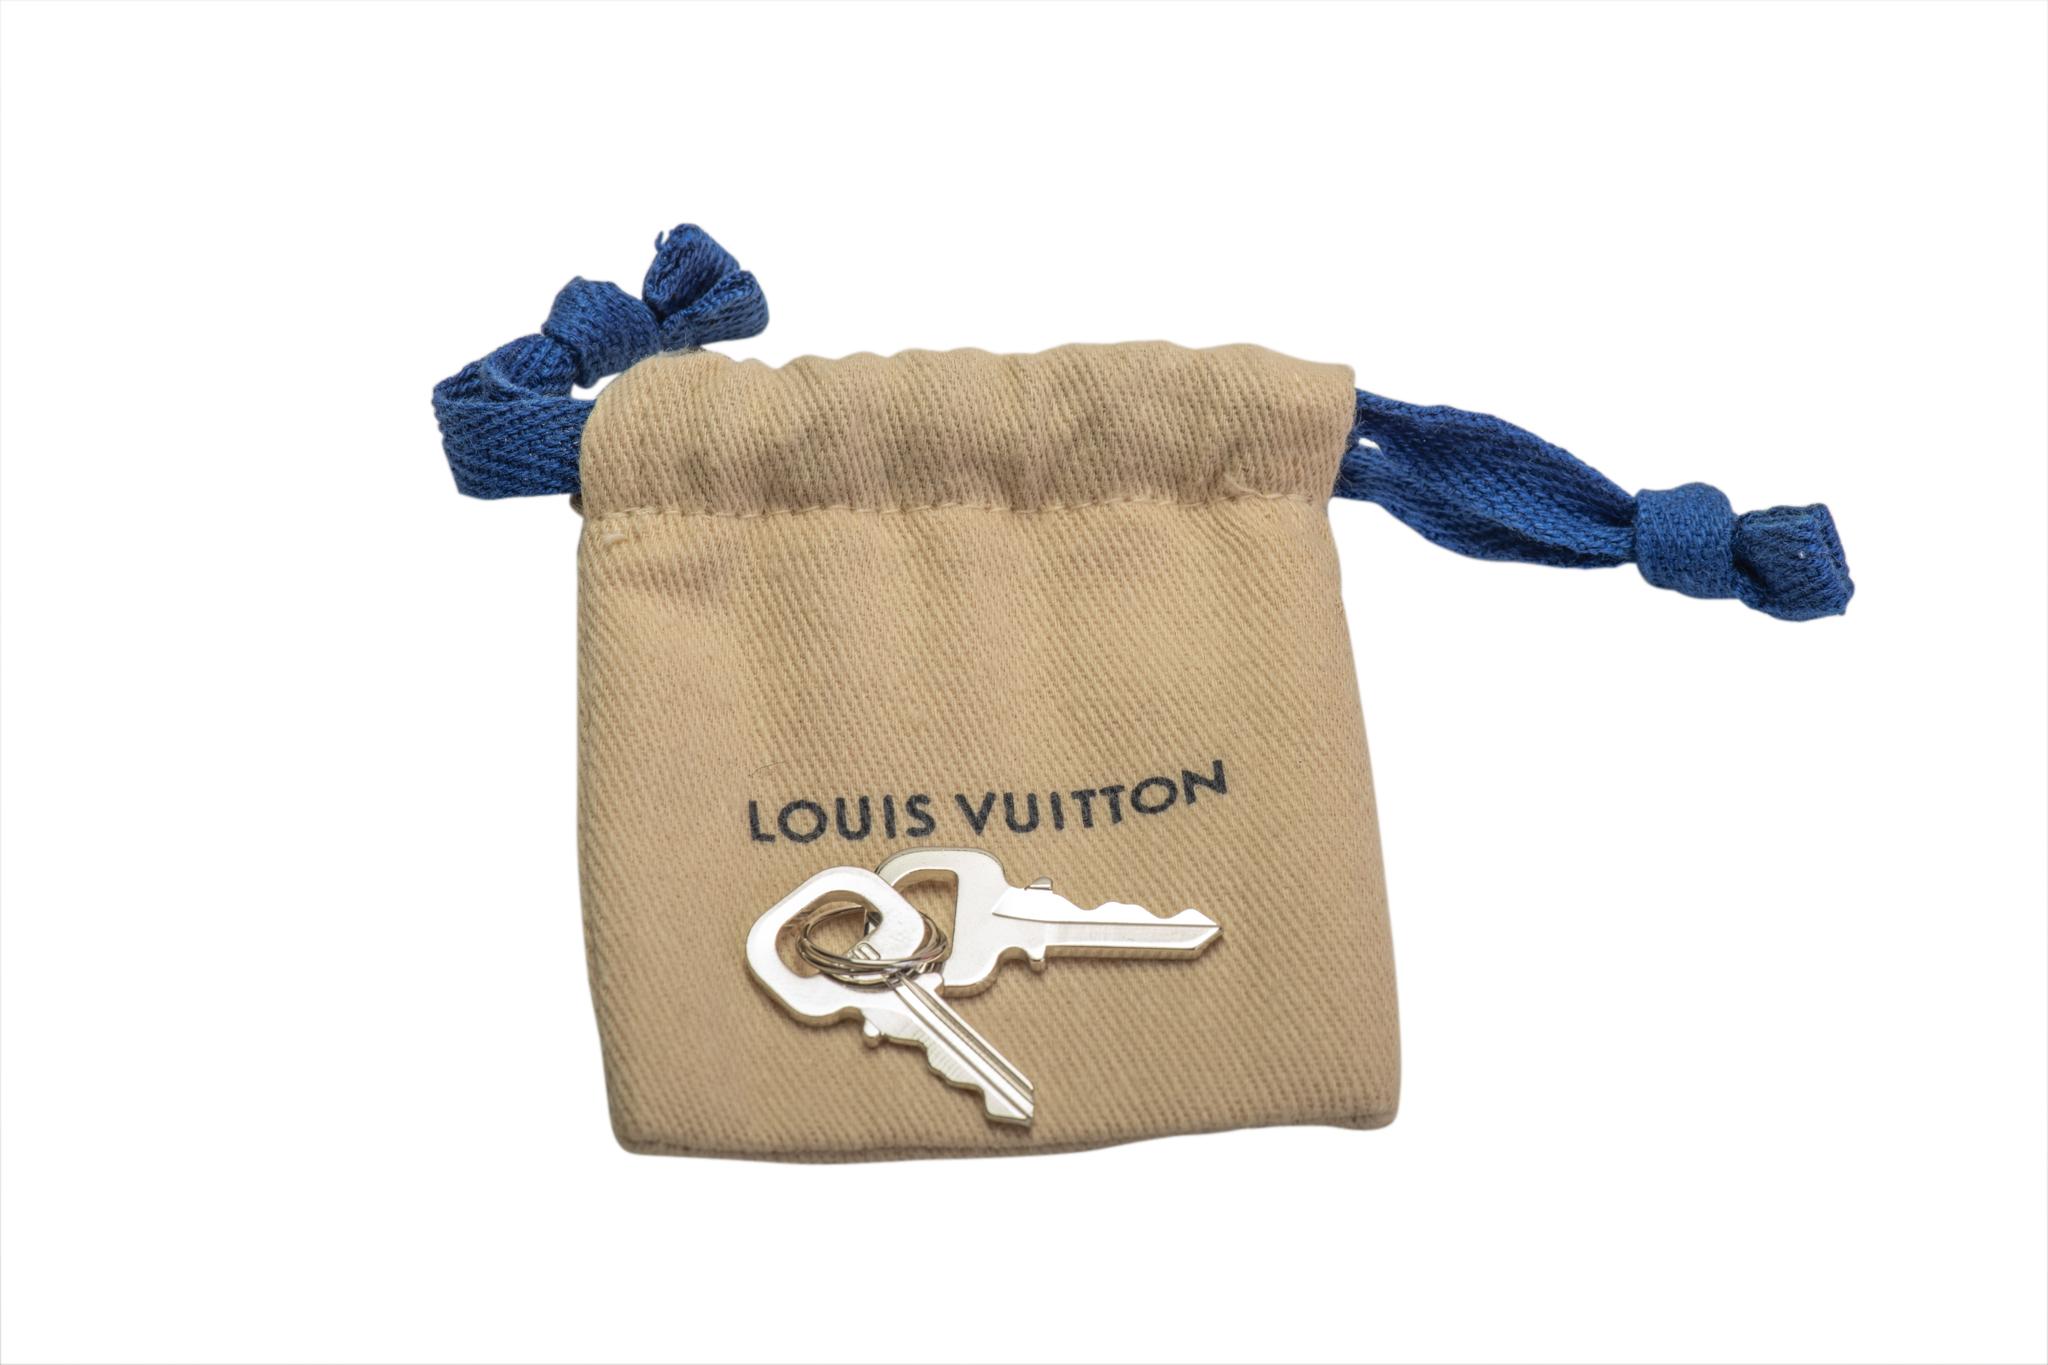 NEW 2019 SOLD OUT Louis Vuitton Runway Prisme Keepall Bag 7